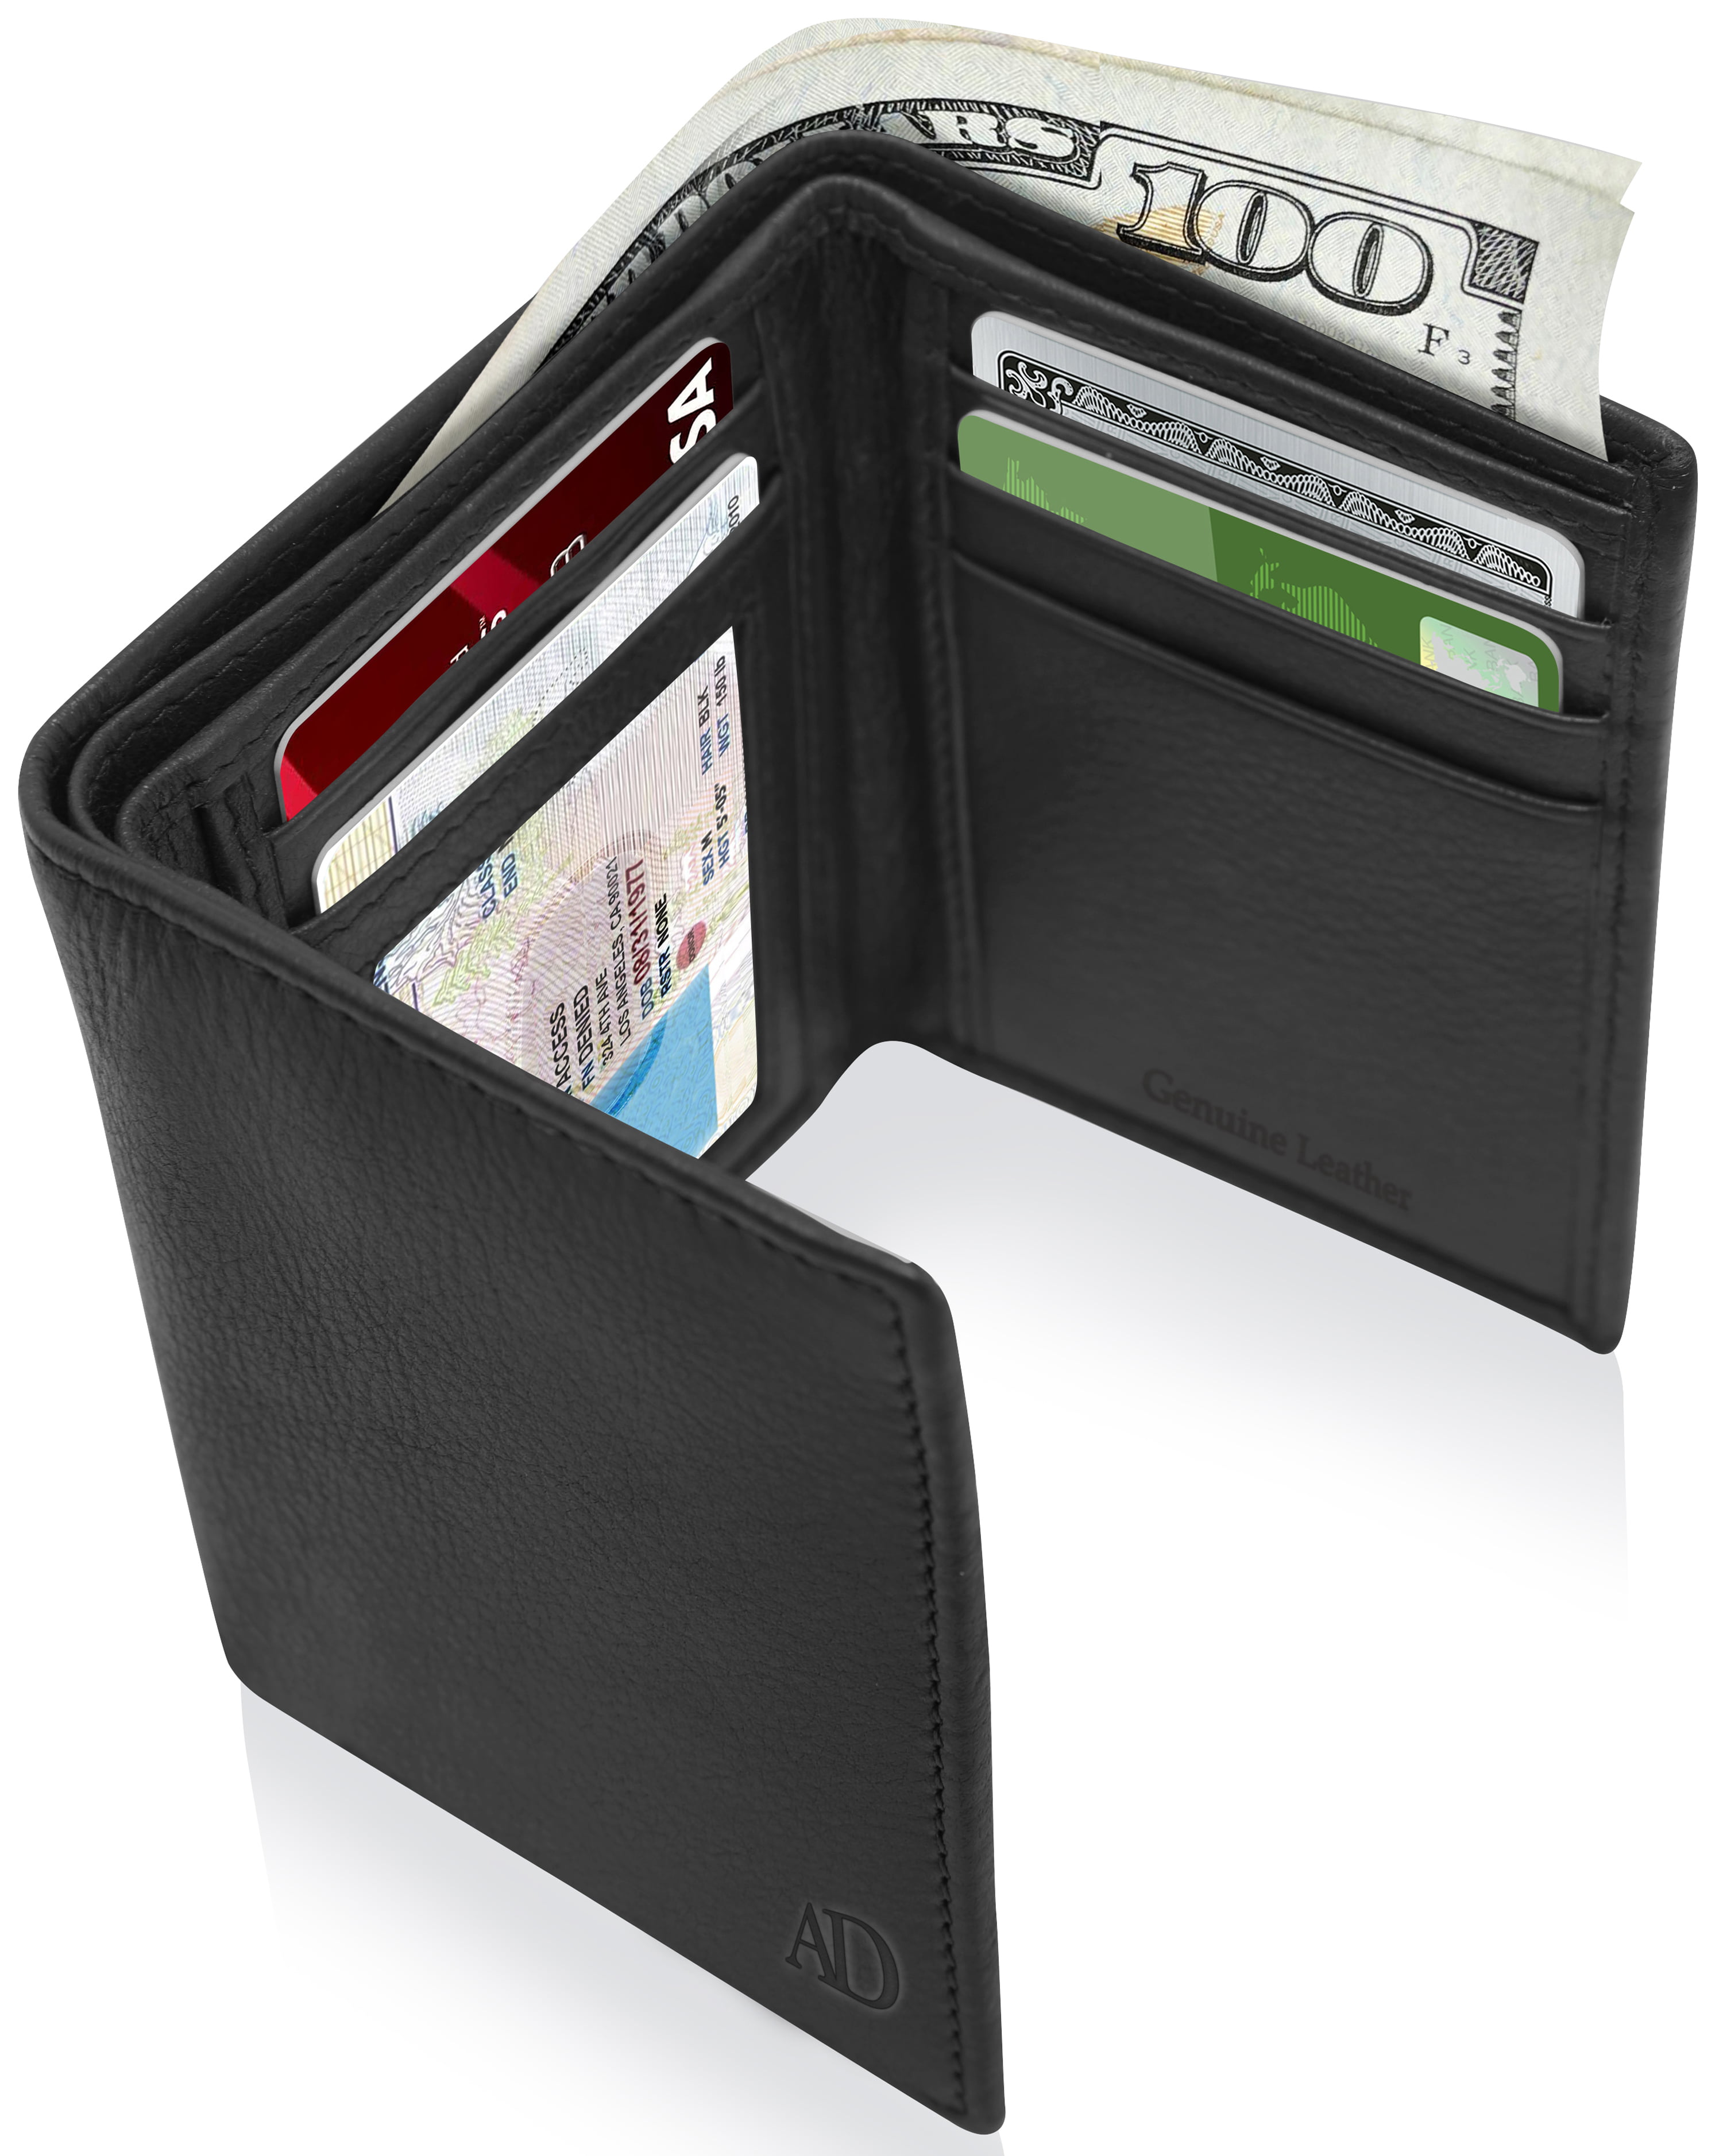 Genuine Leather Wallets For Men - Trifold Mens Wallet With ID Window RFID Blocking - www.waldenwongart.com